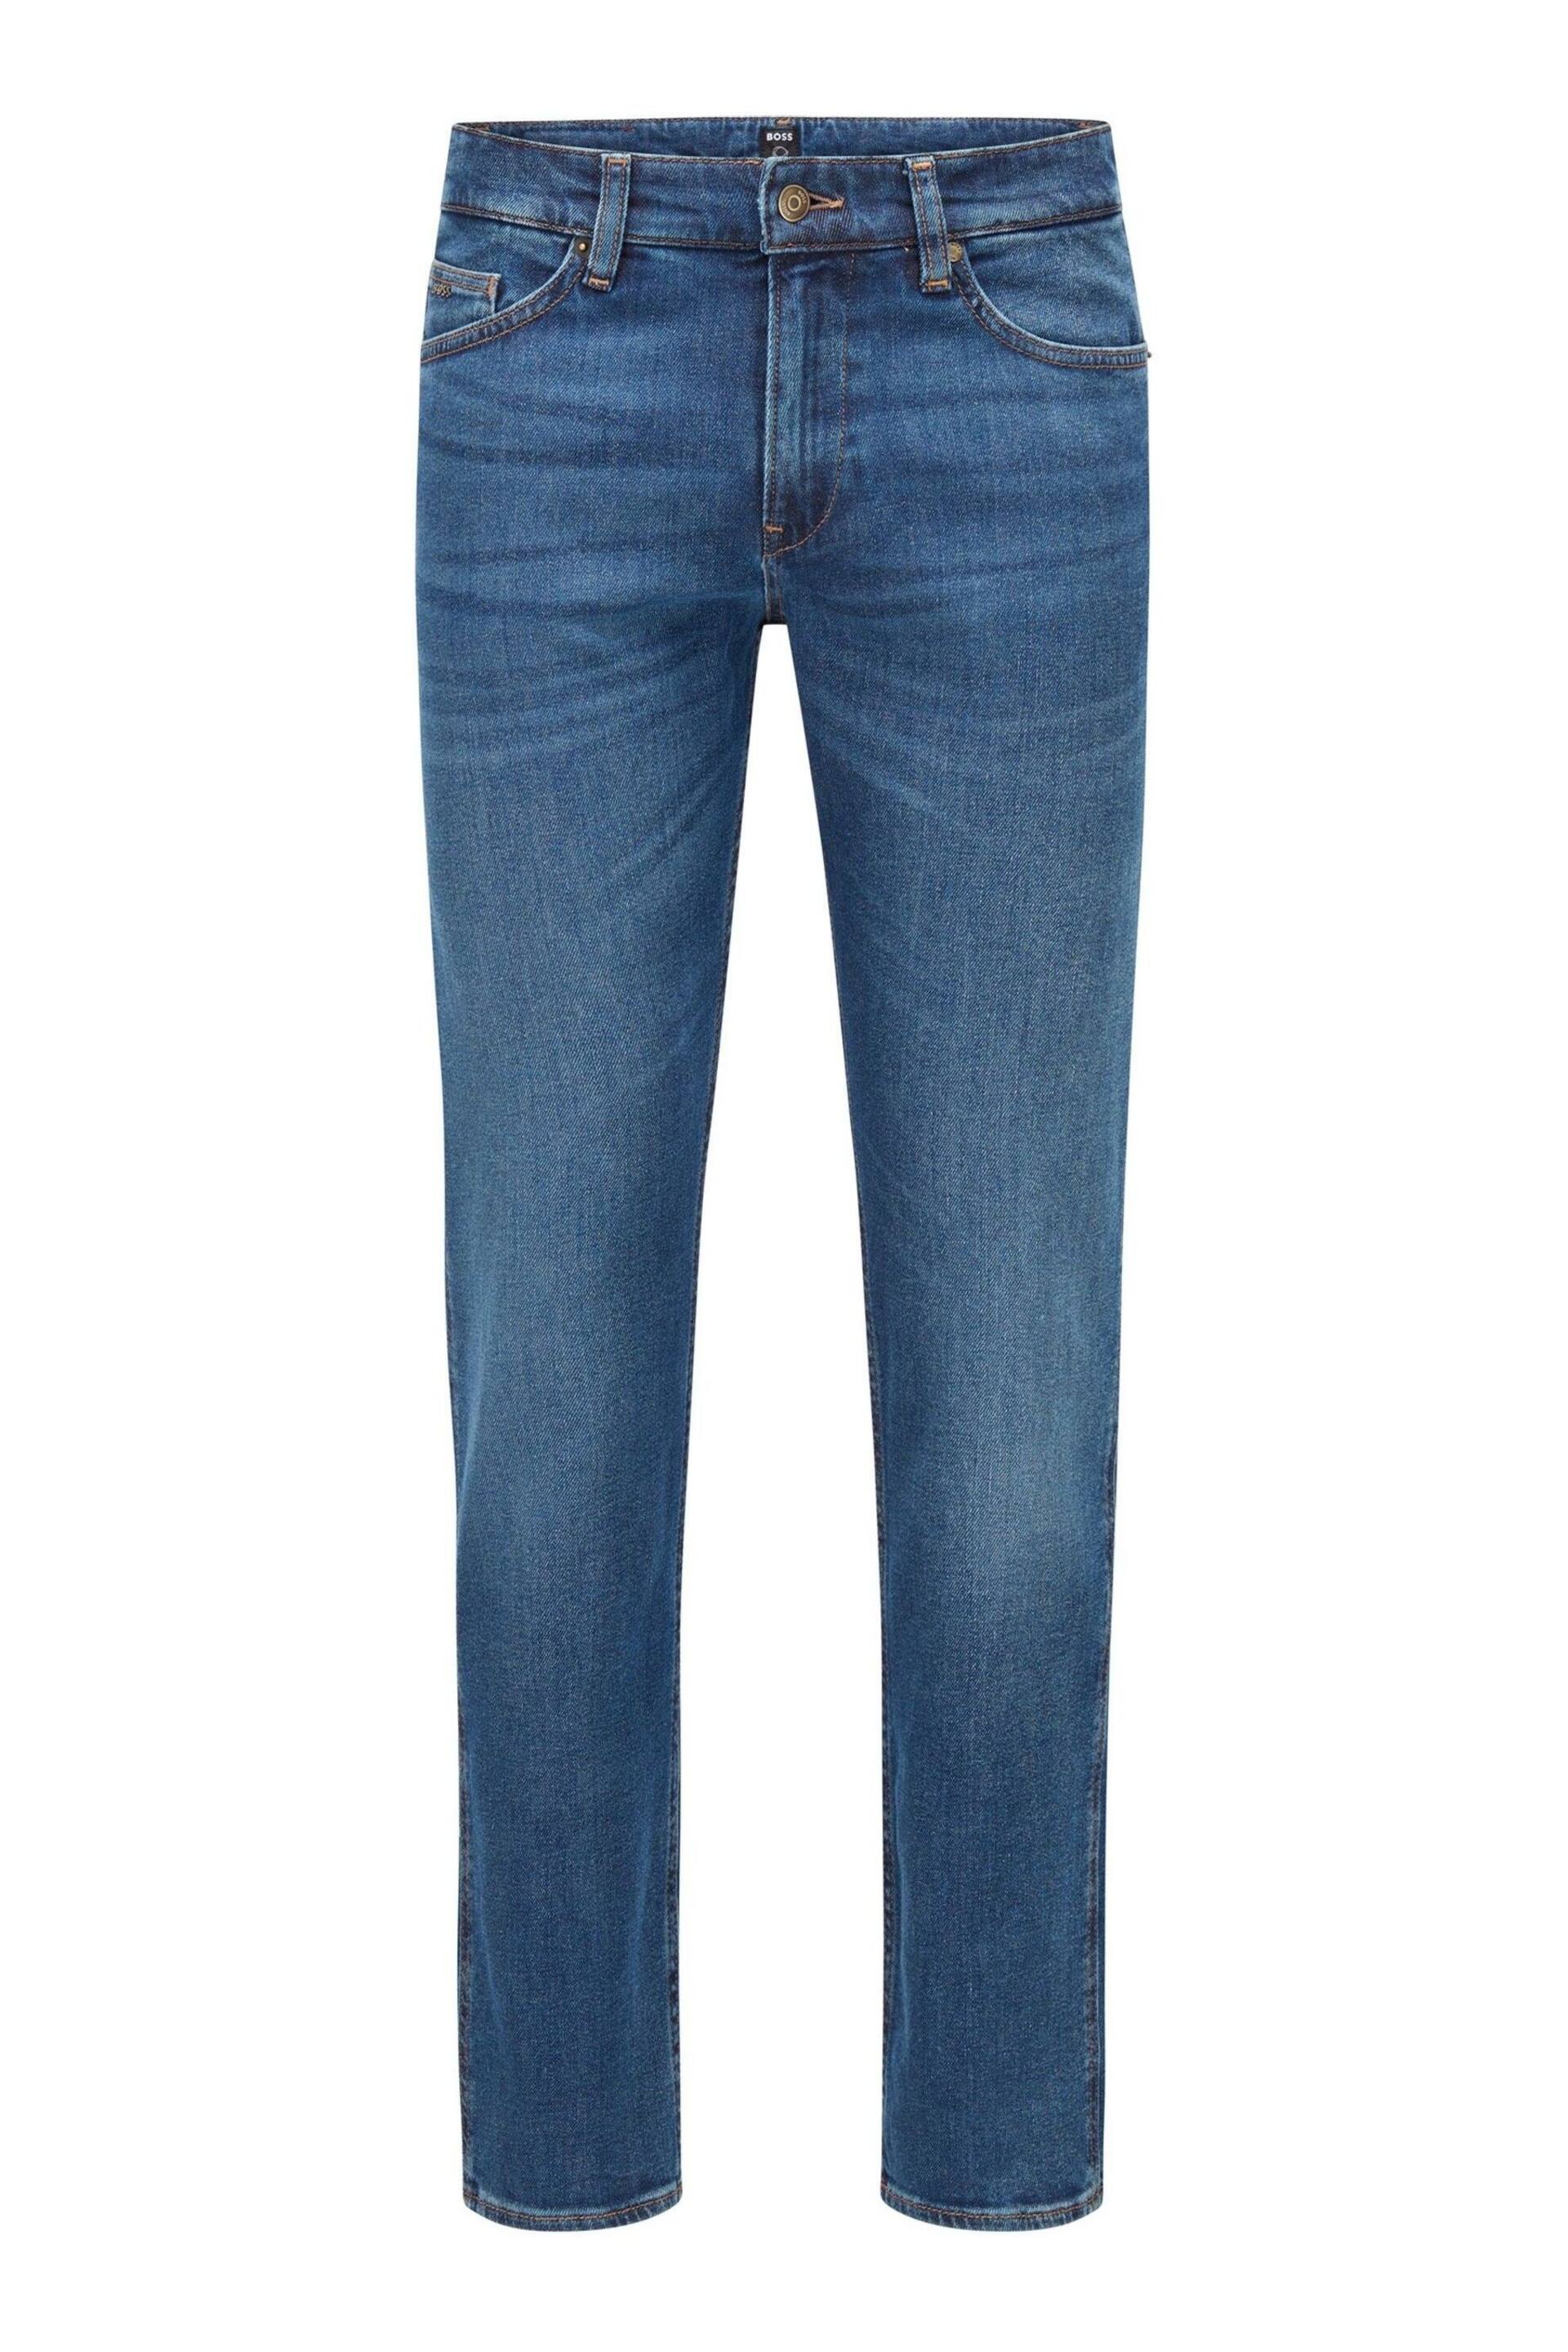 BOSS Mid Blue Delaware Slim Fit Stretch Jeans - Image 5 of 5